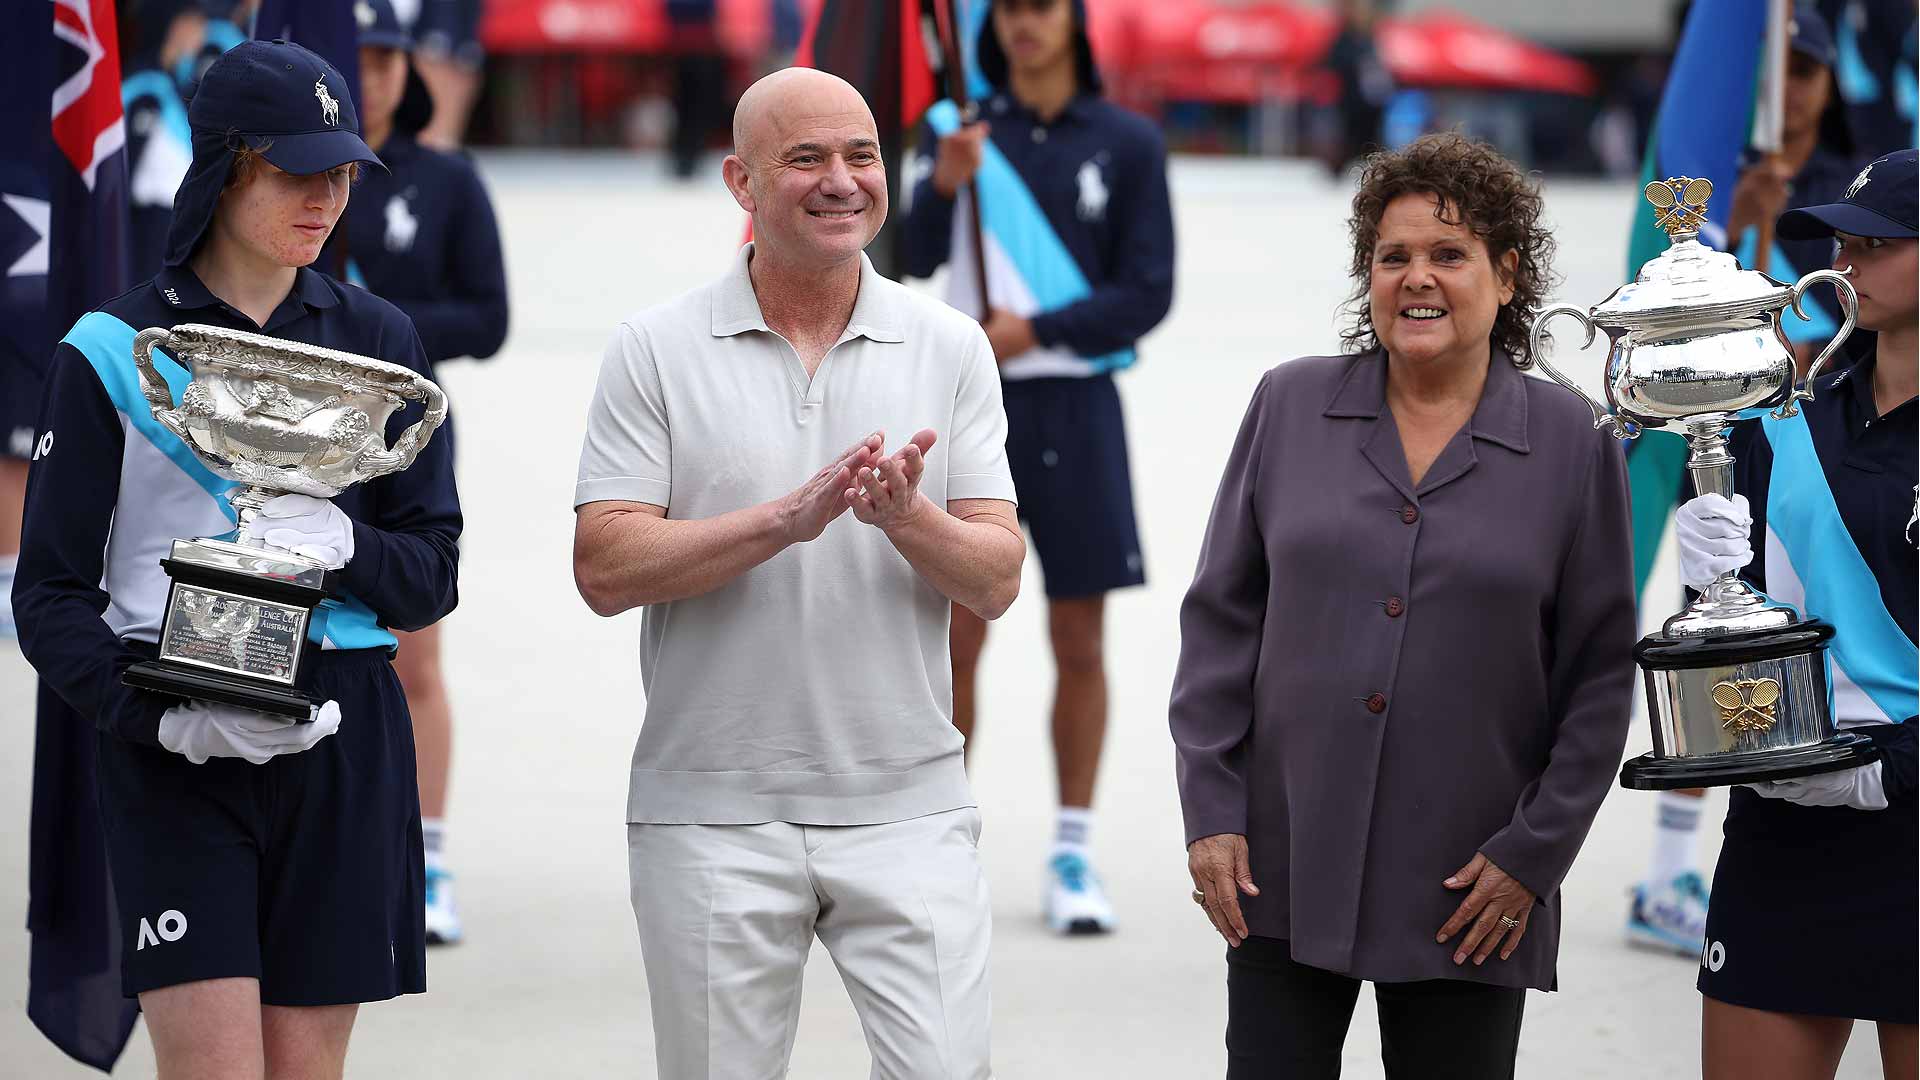 Andre Agassi and Evonne Goolagong Cawley at Melbourne Park on Monday.